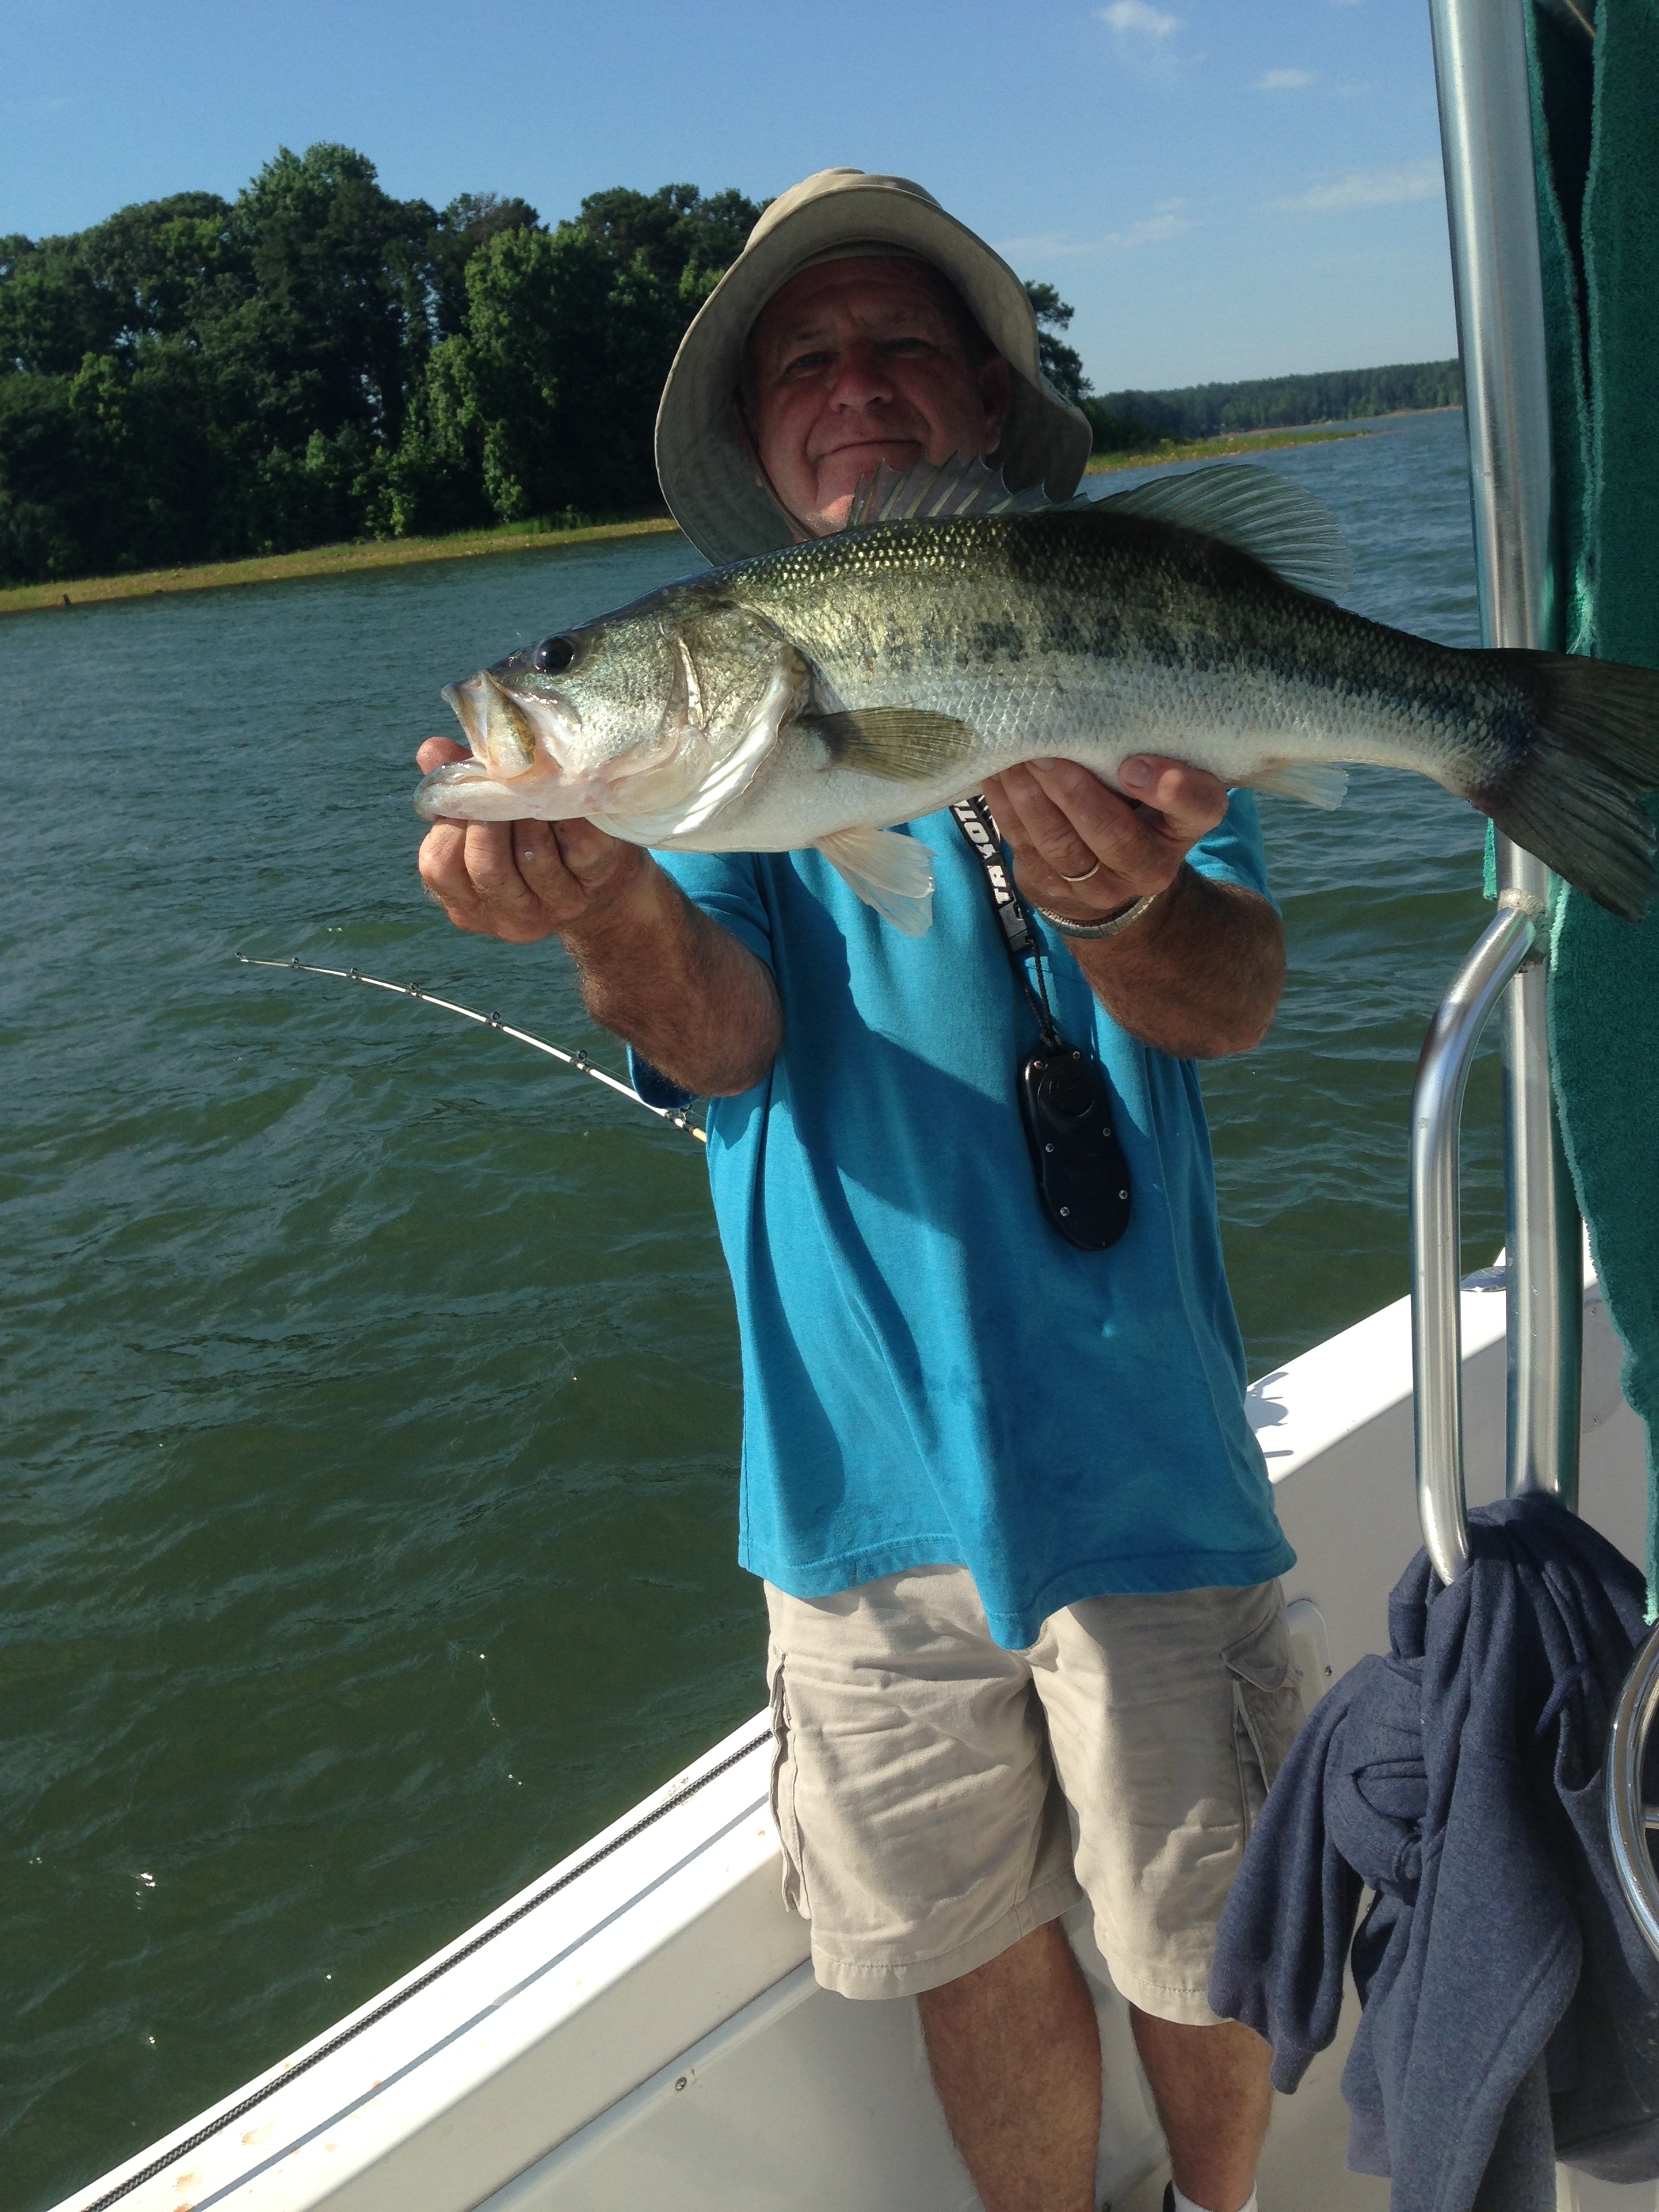 May 27, 2017 Billy with his 8 pound bass